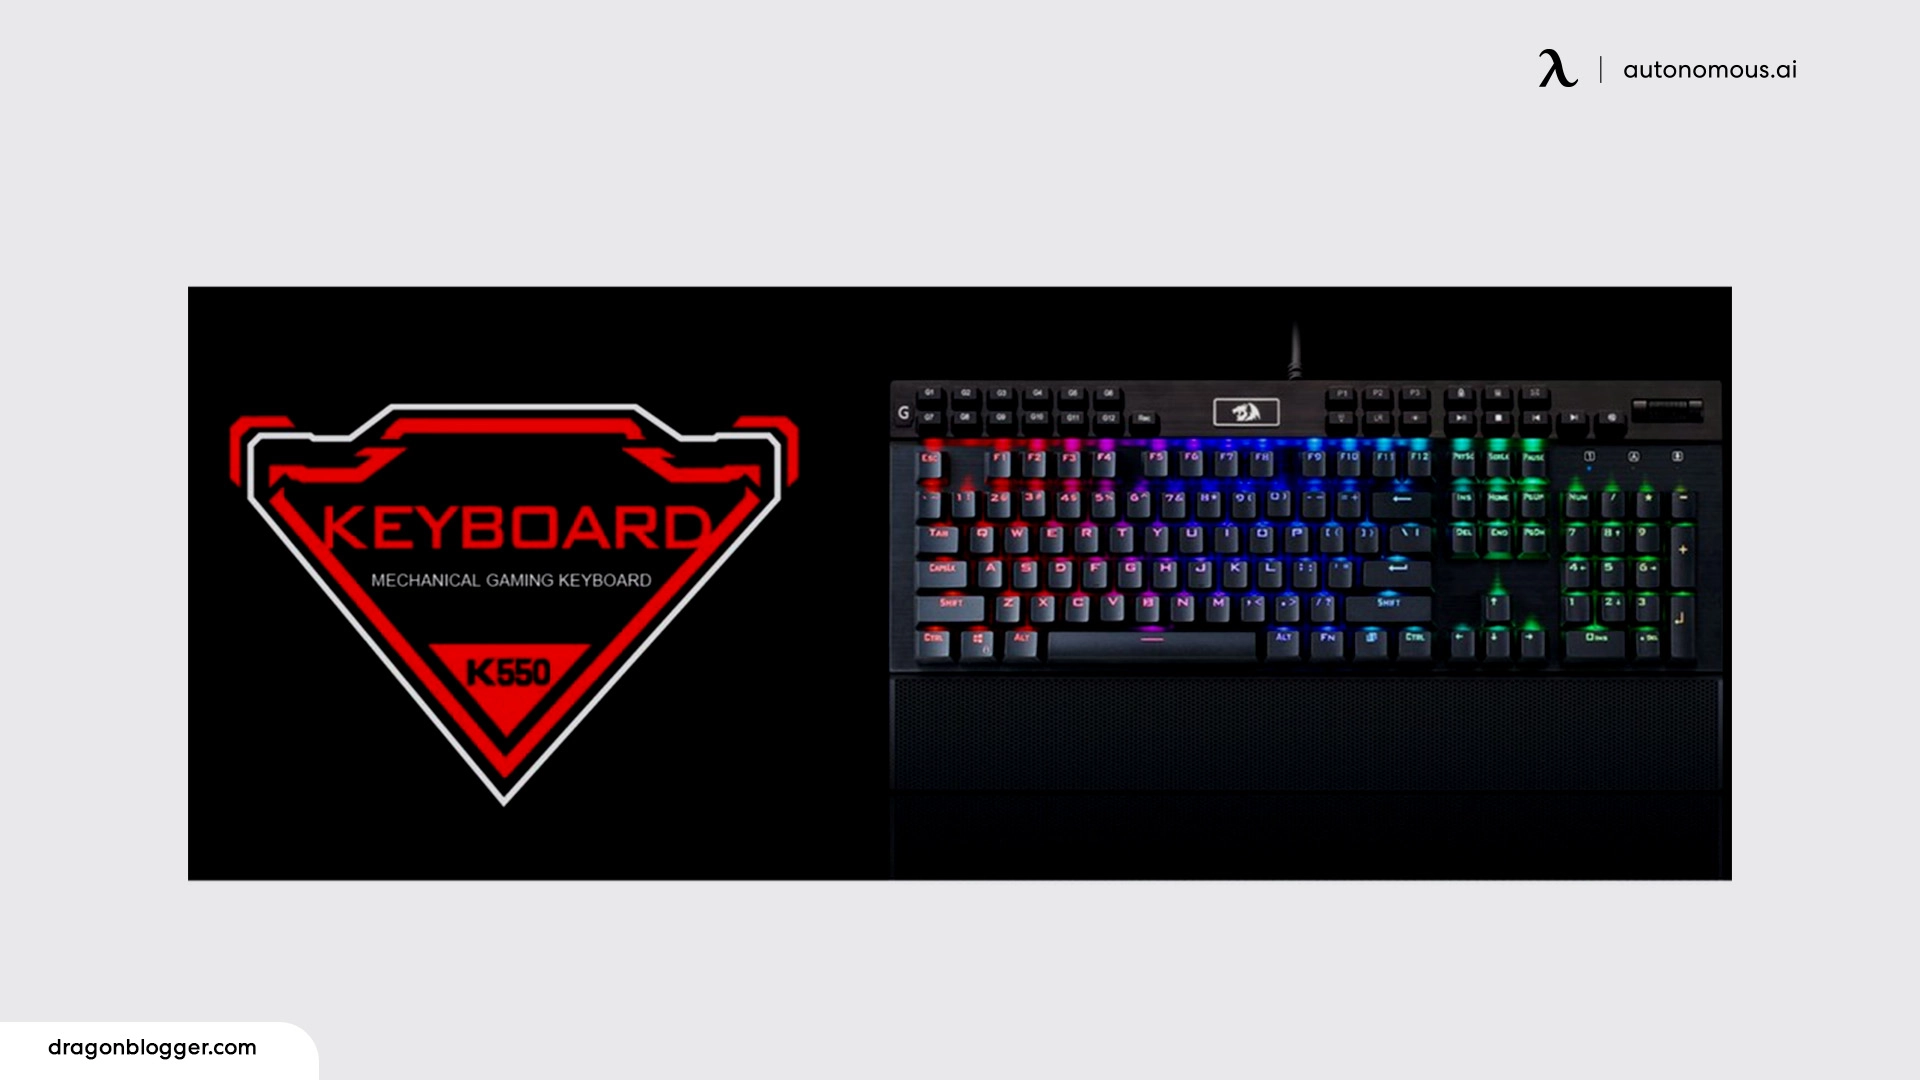 What Does Redragon Keyboard Software Offer?